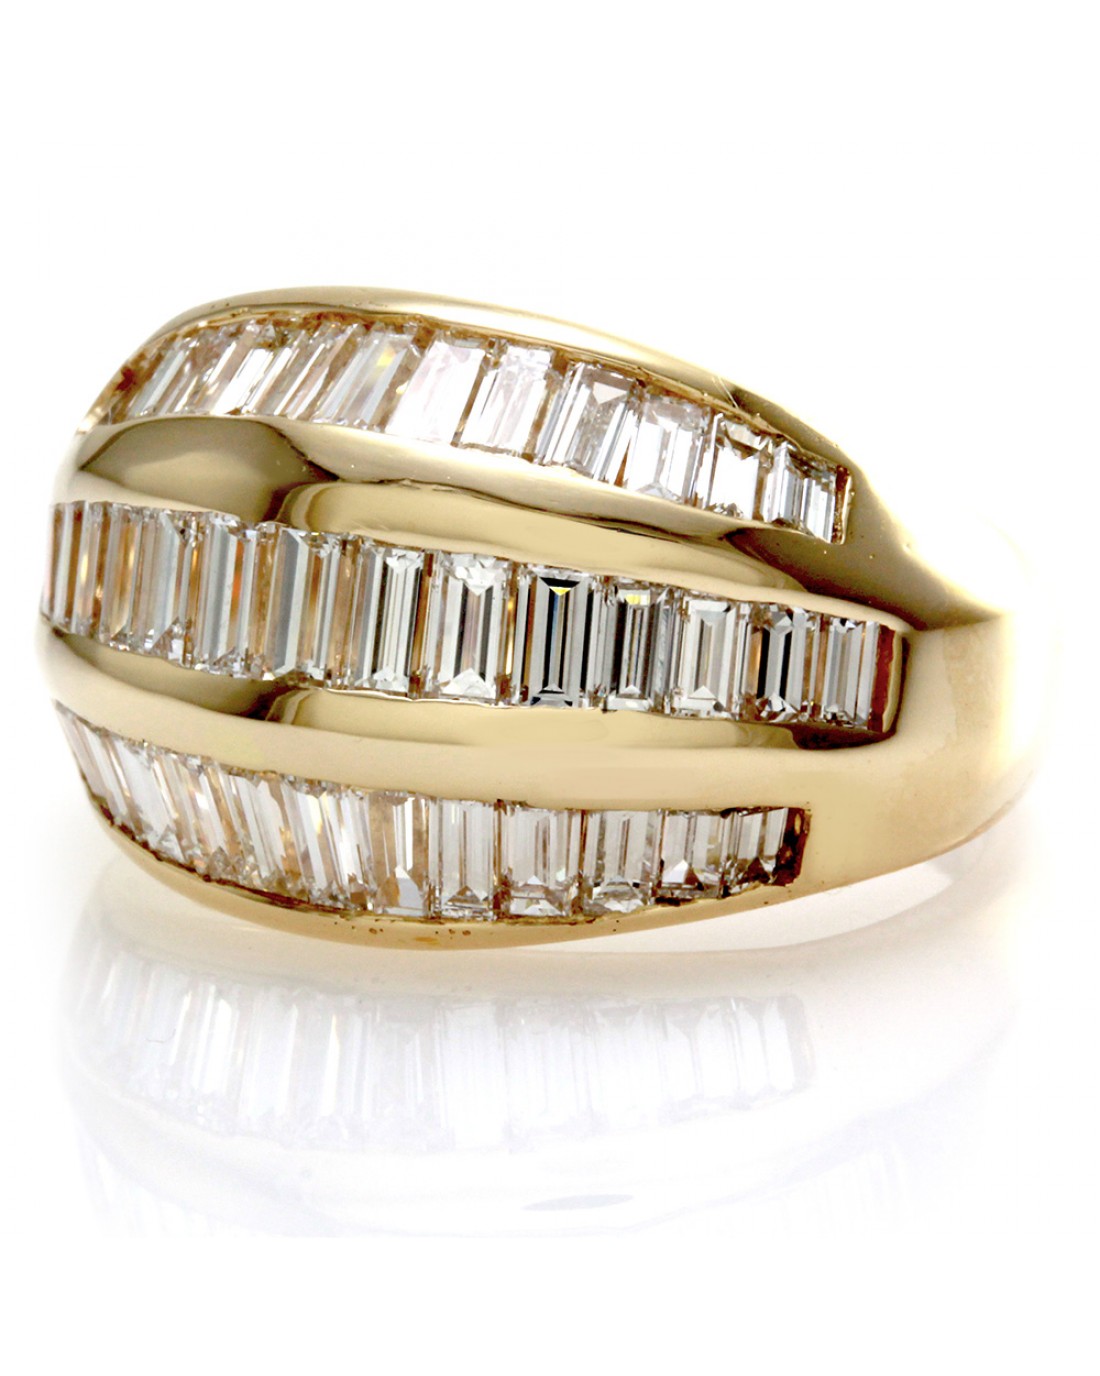 Vintage 3 Row Baguette Cut Diamond Dome Ring in 18K Yellow Gold